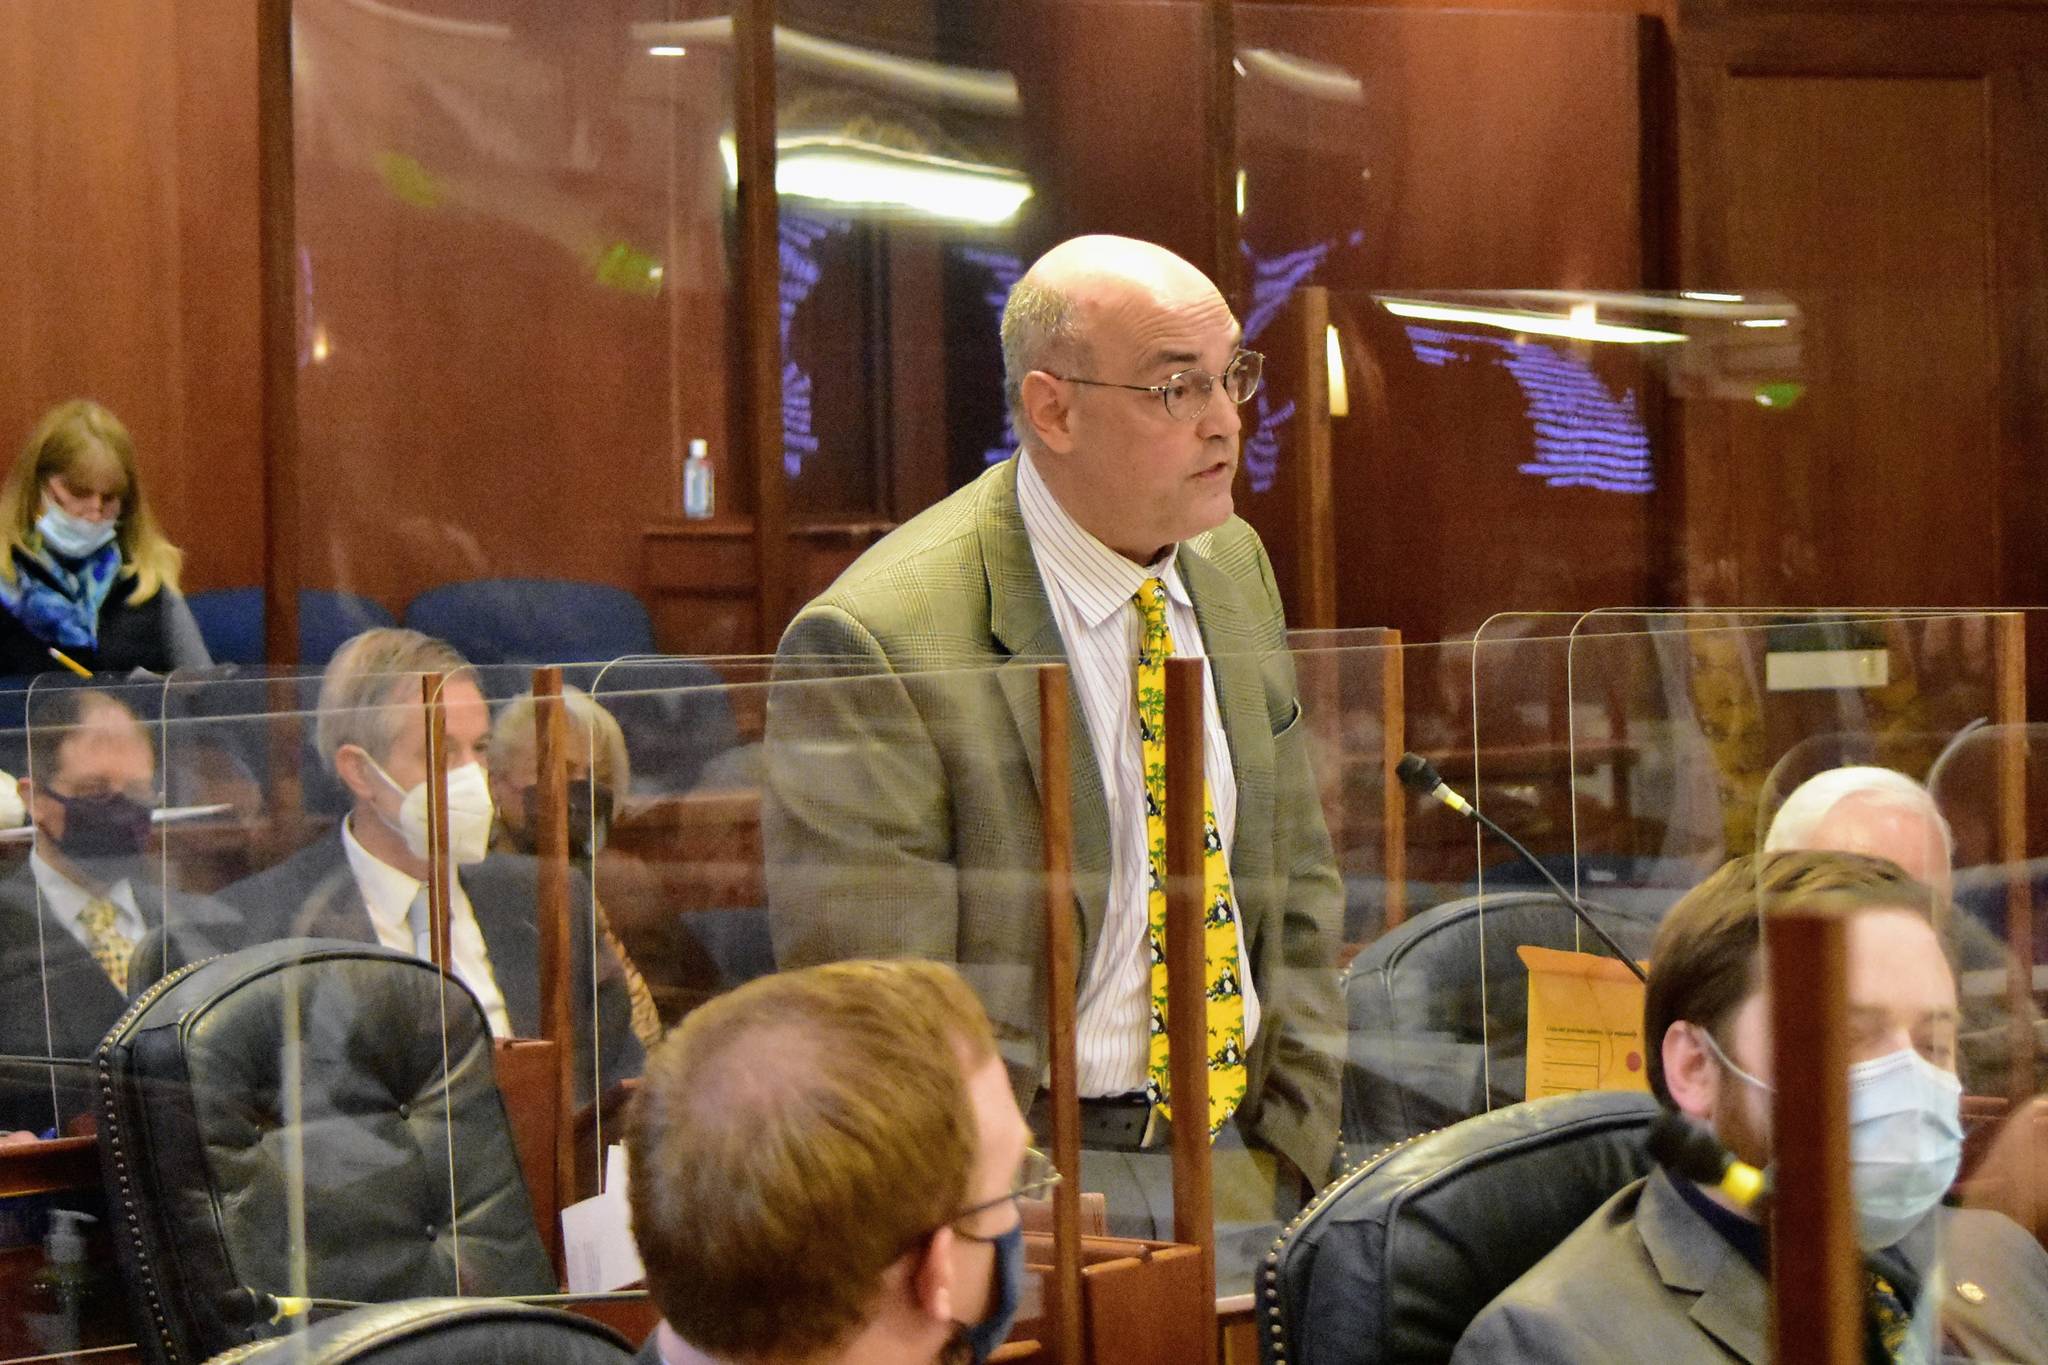 Rep. Andy Josephson, D-Anchorage, speaks to his concerns about Gov. Mike Dunleavy's appointment of Treg Taylor of Attorney General during a joint session of the Alaska State Legislature on Tuesday, May 11, 2021. (Peter Segall / Juneau Empire)